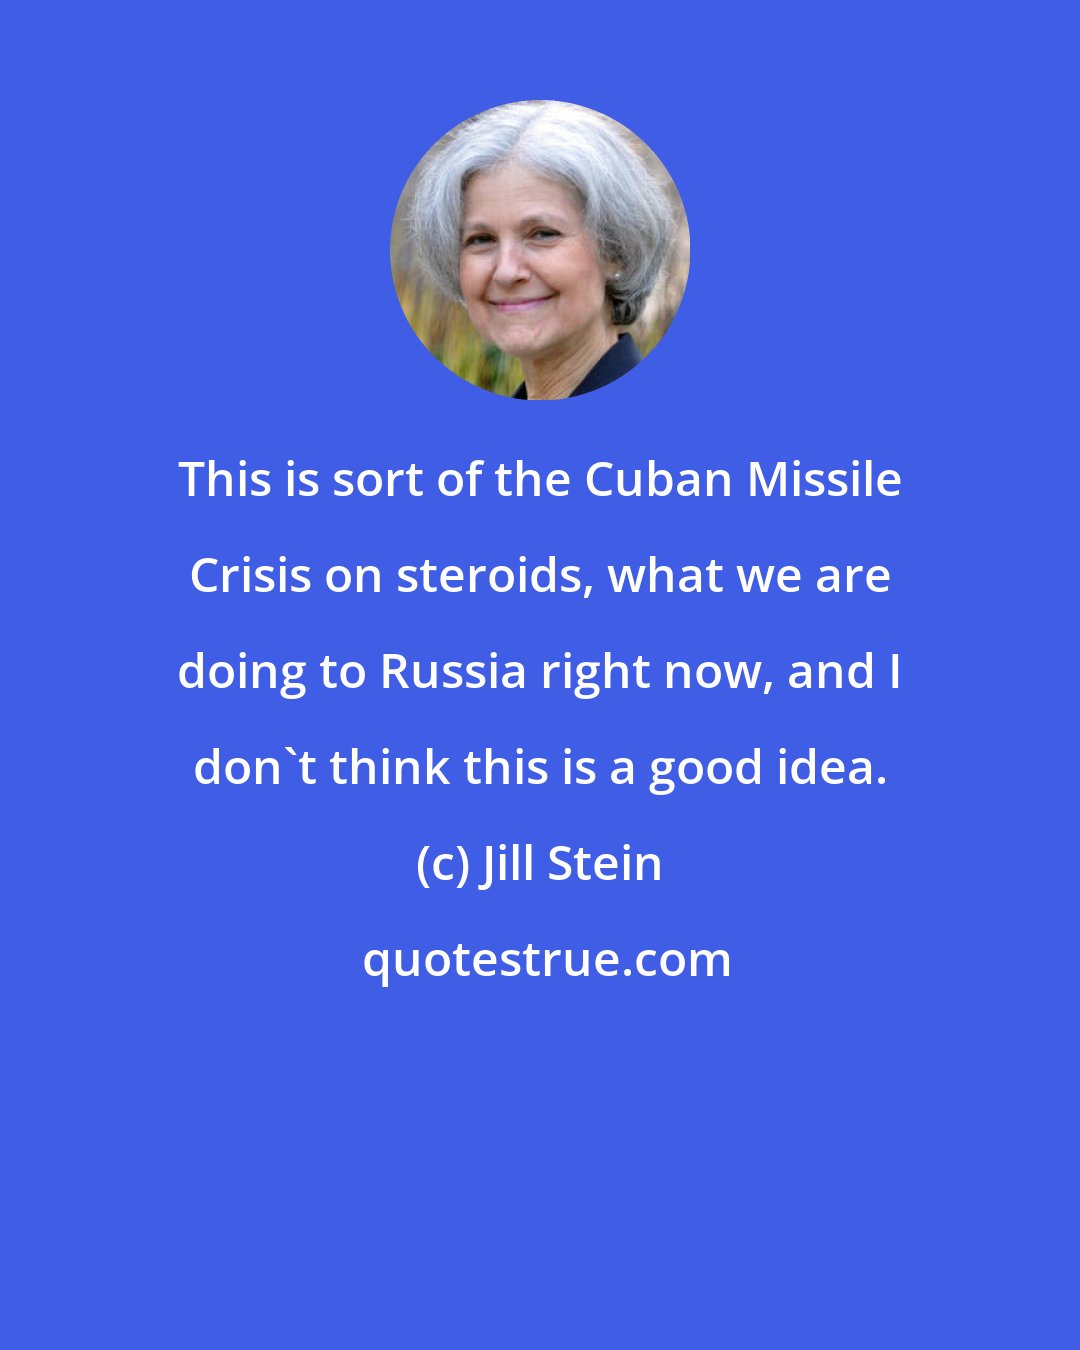 Jill Stein: This is sort of the Cuban Missile Crisis on steroids, what we are doing to Russia right now, and I don't think this is a good idea.